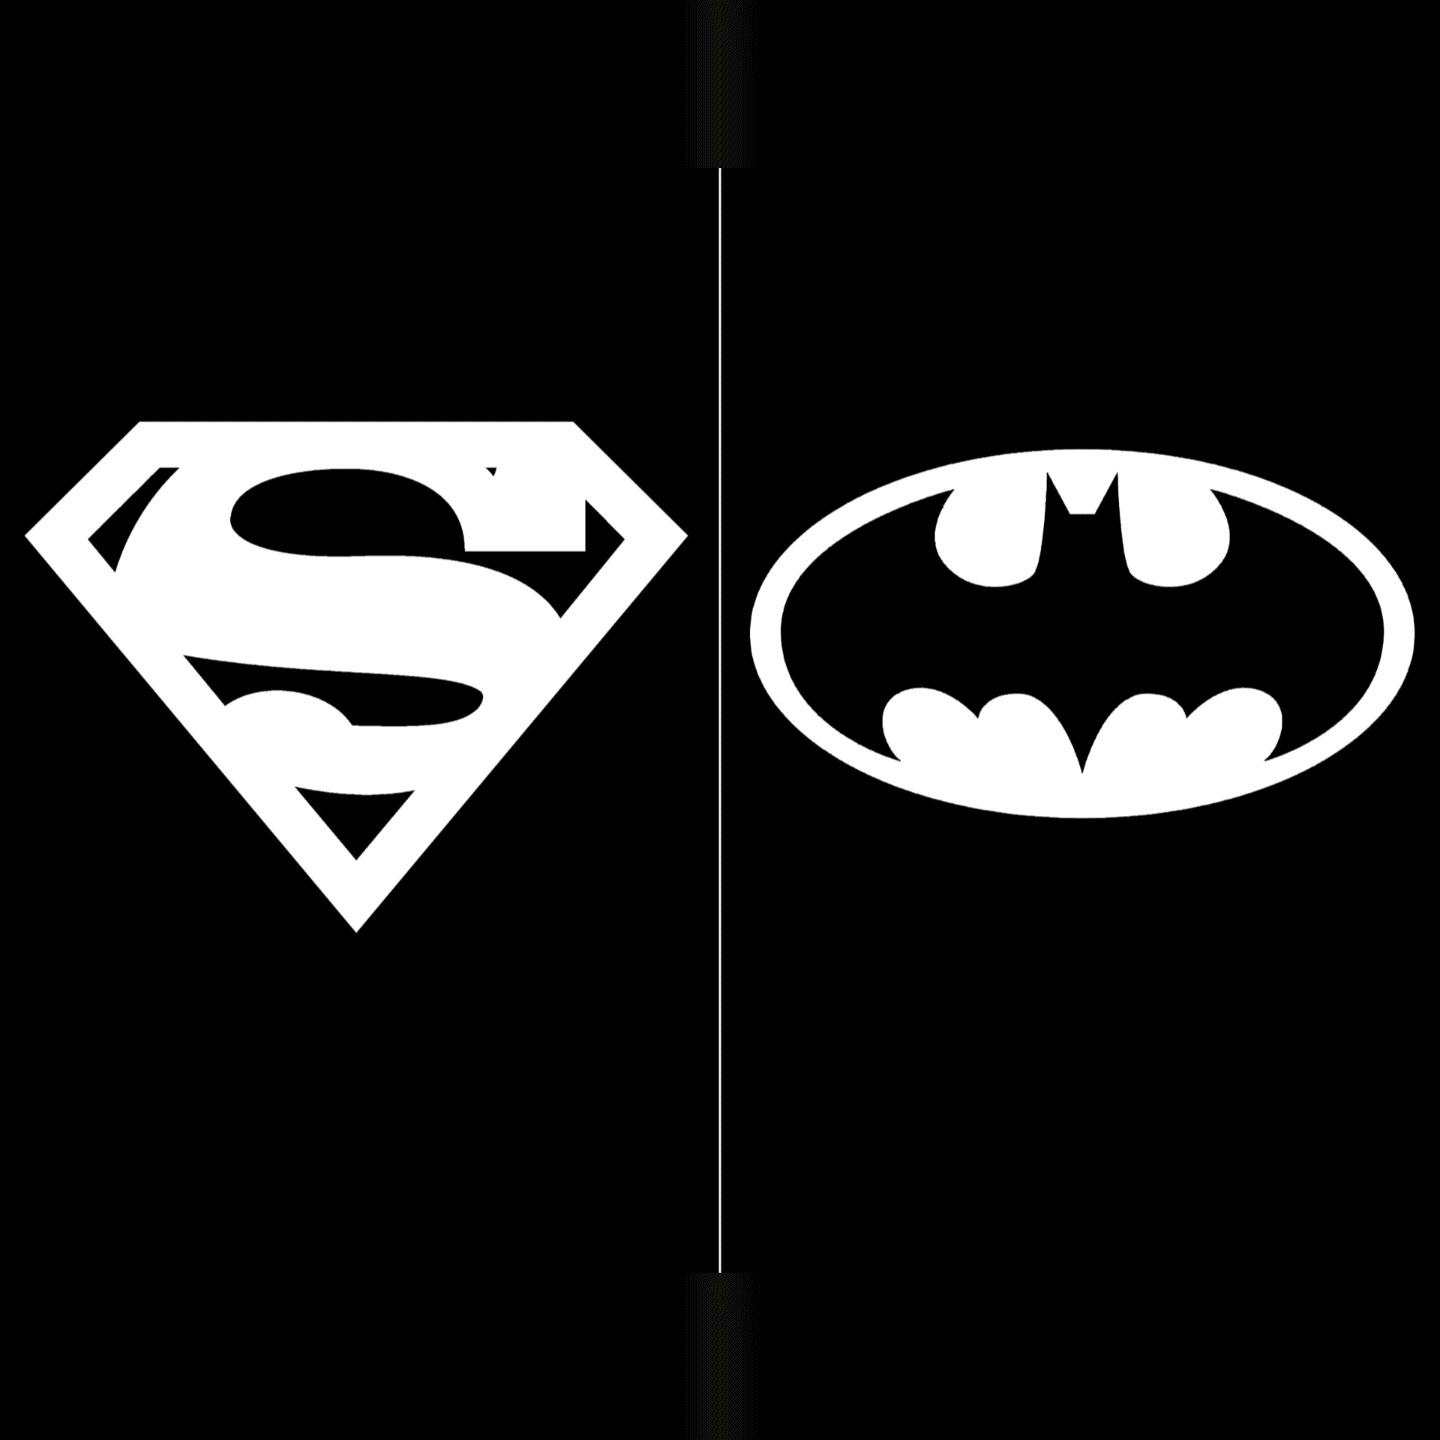 SUPERMAN 78 & BATMAN 89 GLOW IN THE DARK EXCLUSIVE VARIANT COVER OPTIONS